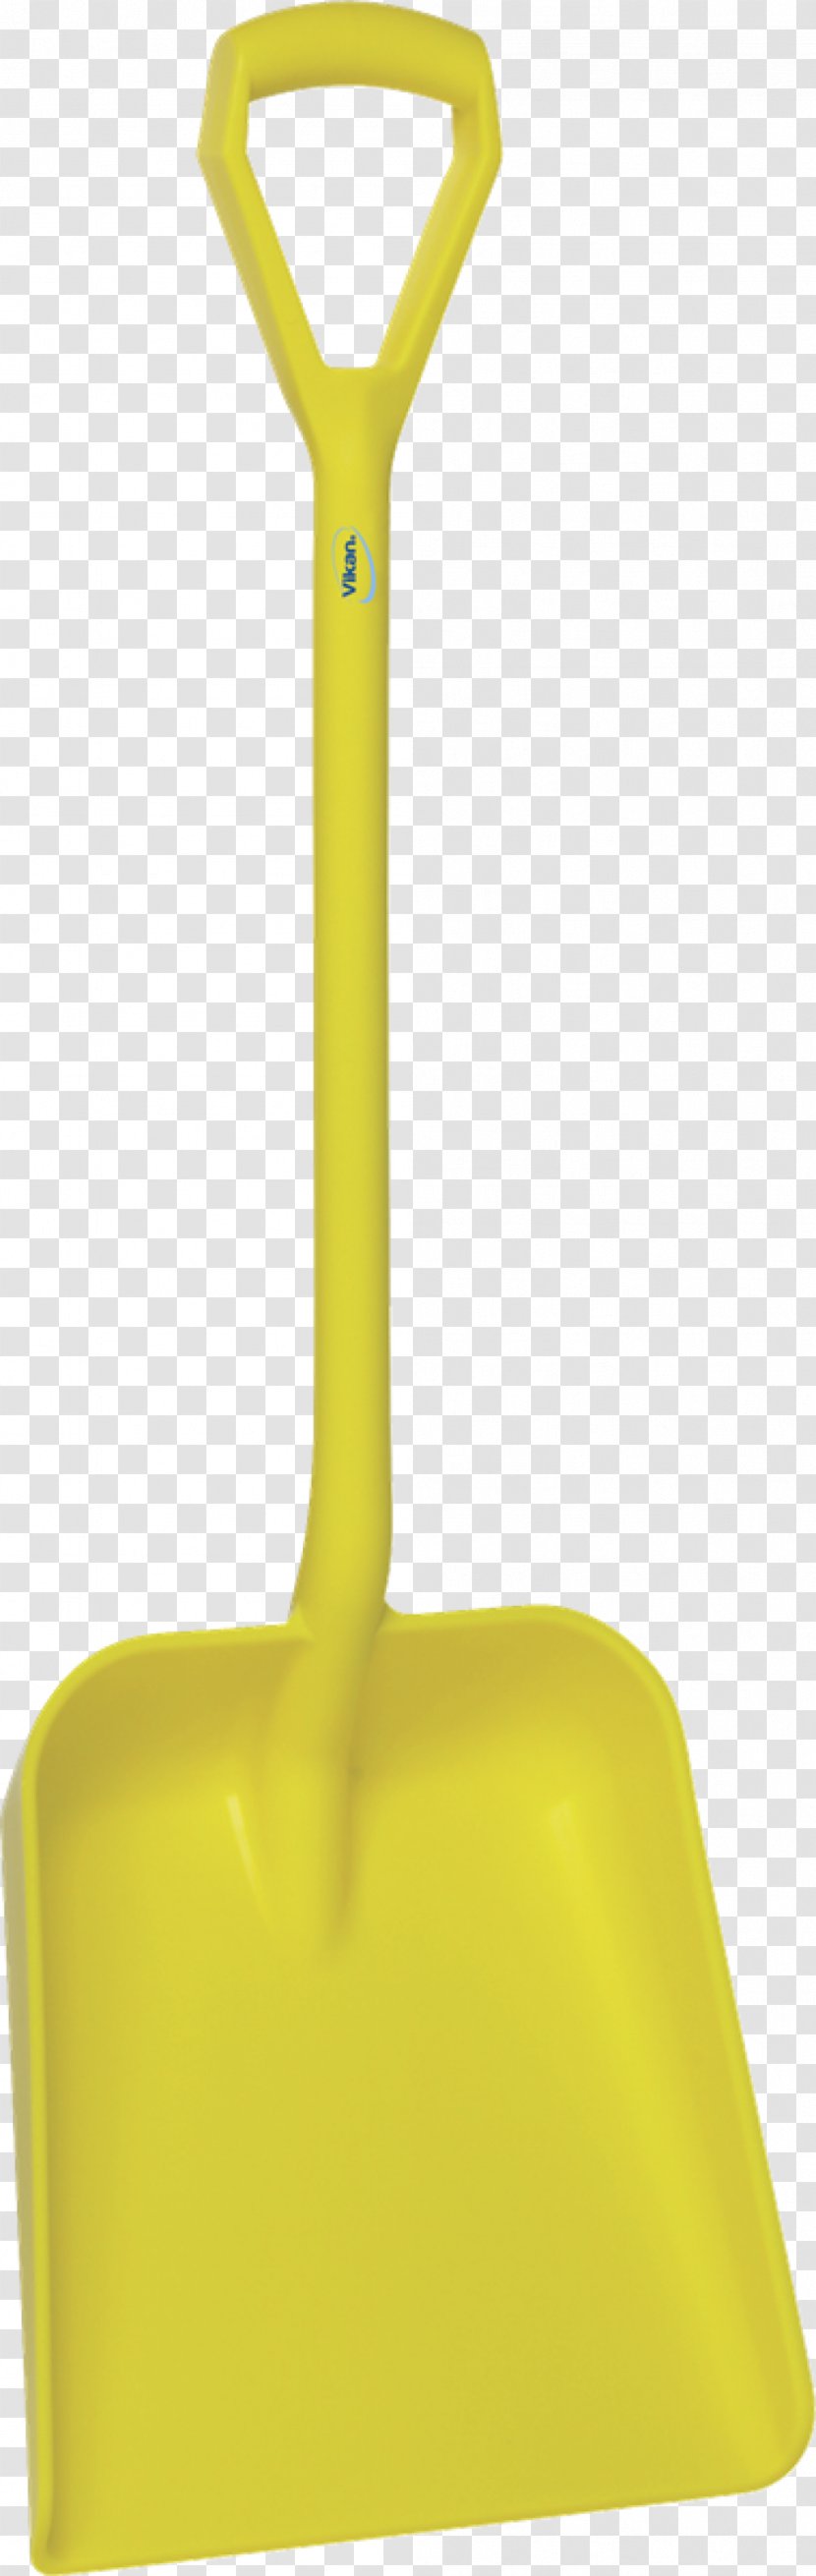 Household Cleaning Supply Yellow Shovel Millimeter Product - Saint Petersburg Transparent PNG